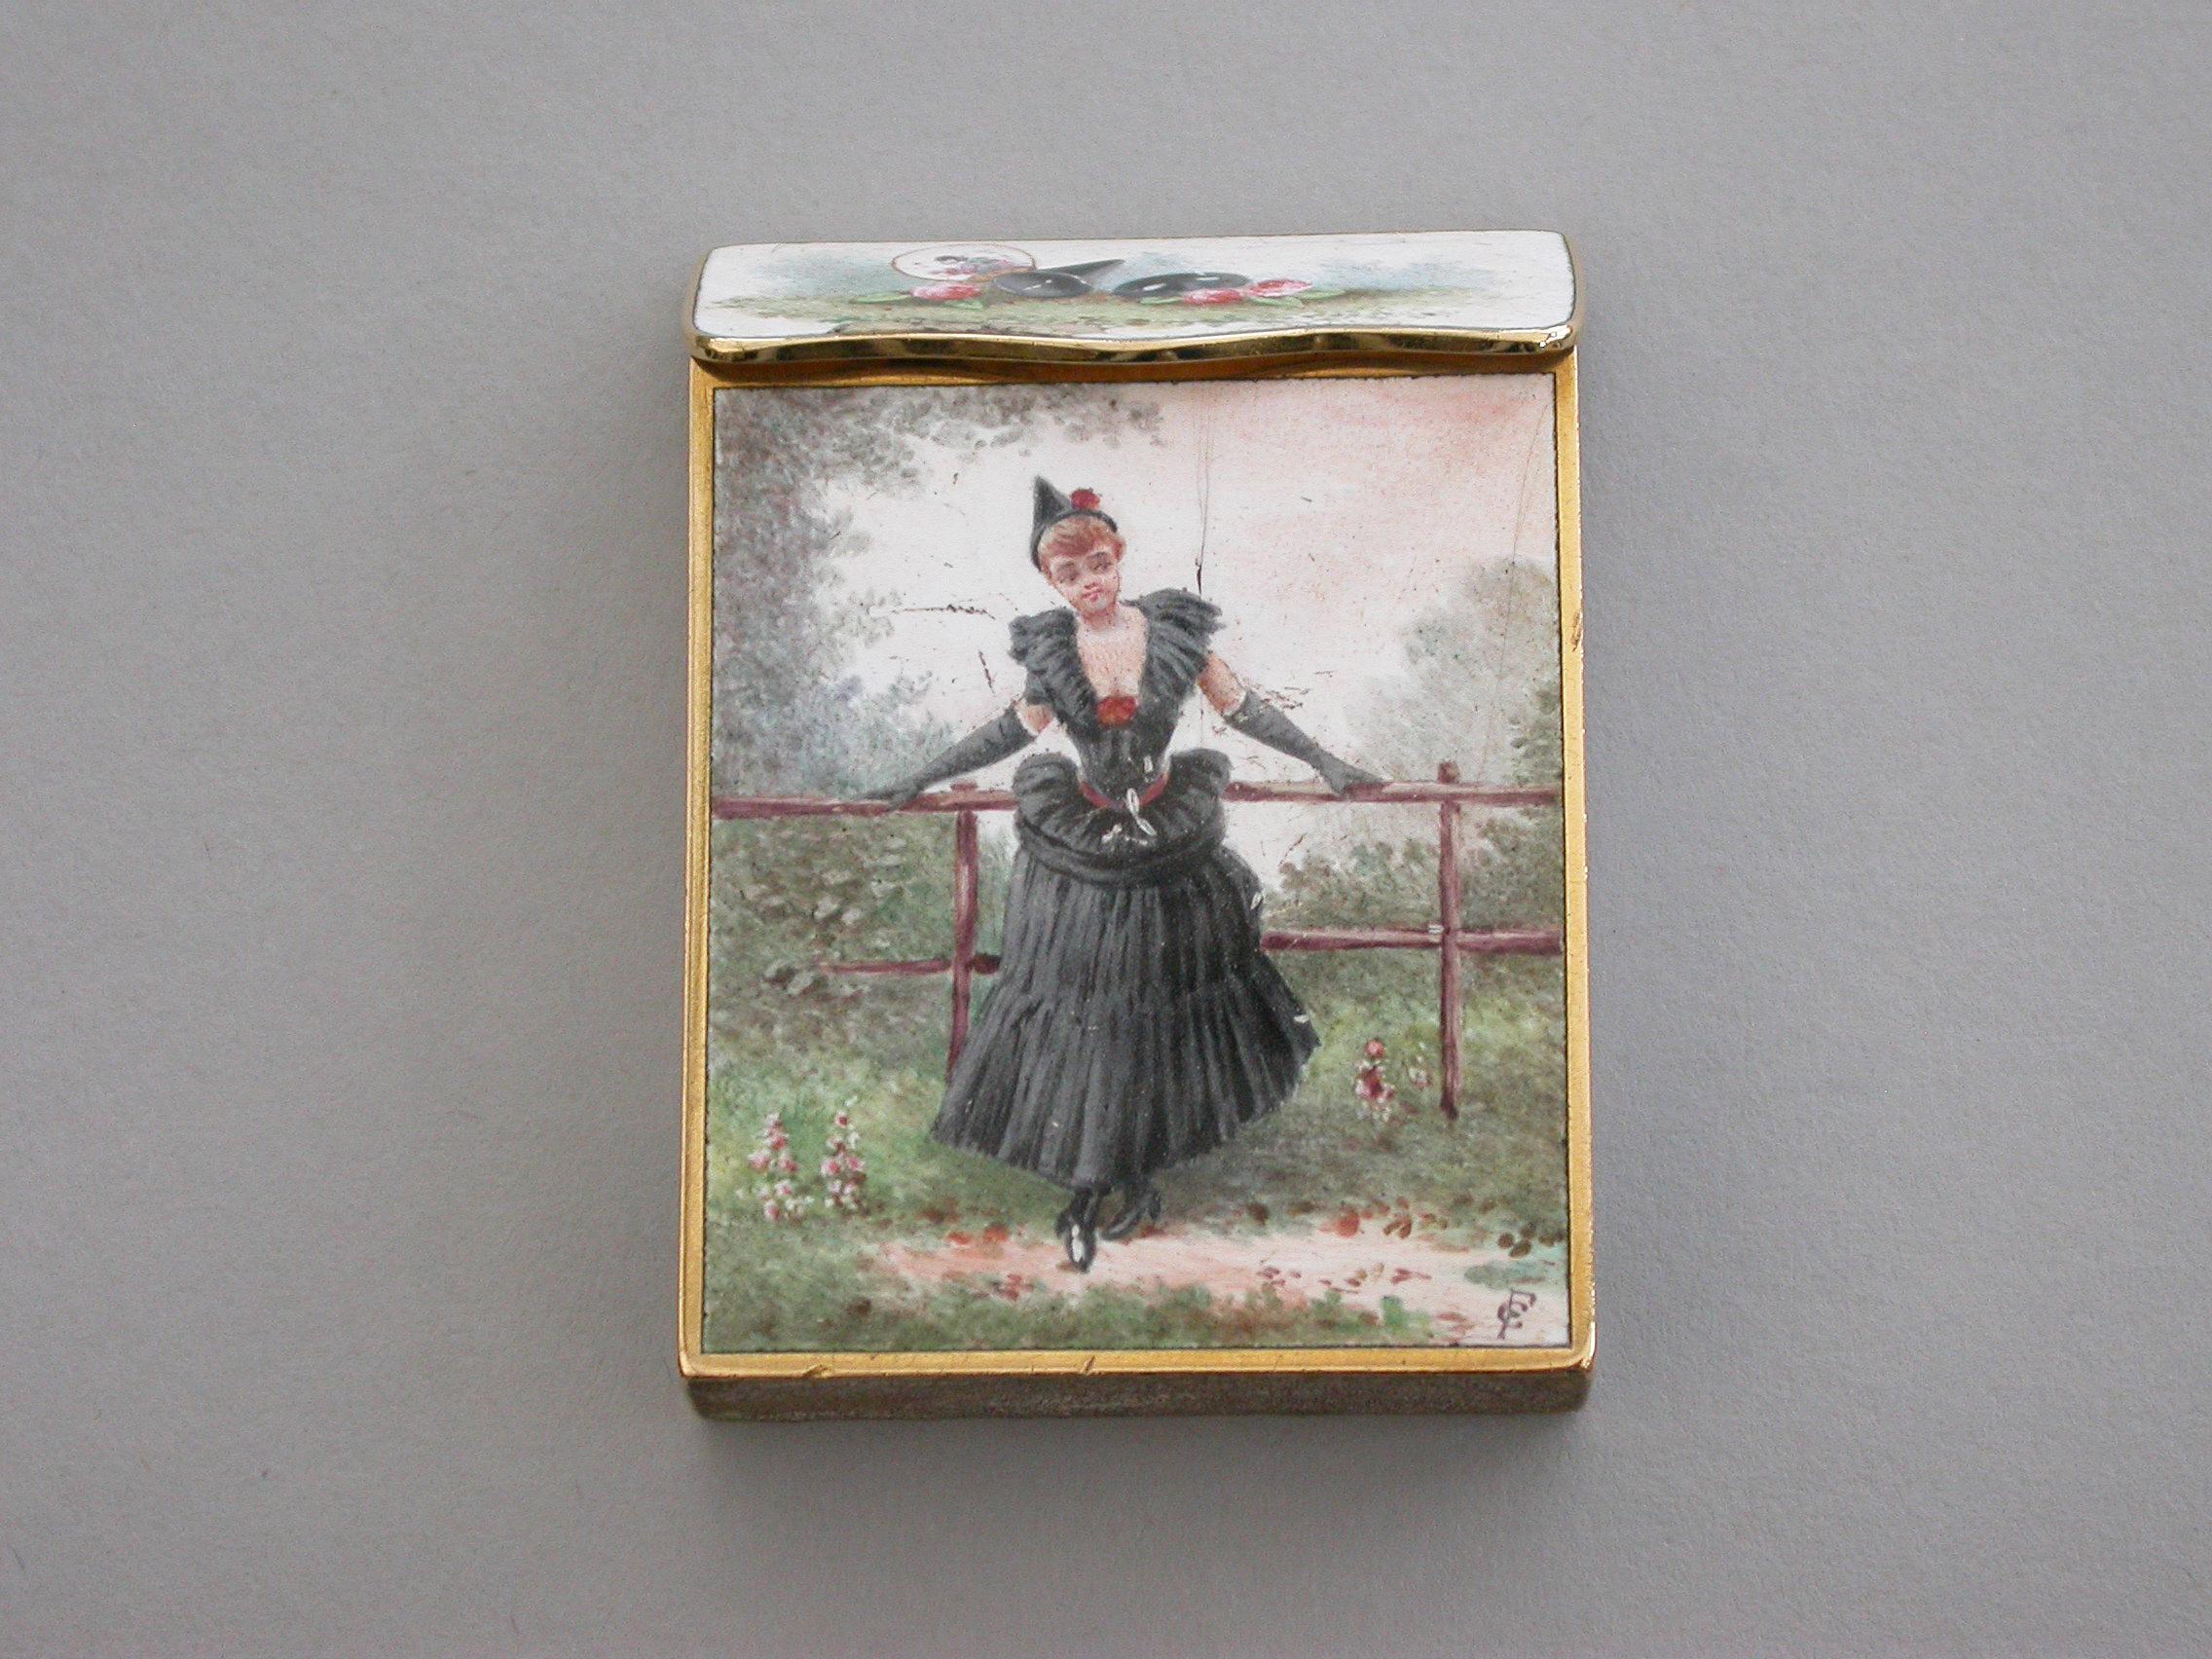 A late 19th century French gold and enamel Vesta case of rectangular form with sloping sprung hinged lid, enameled on all surfaces apart from the base with images of glamorous ladies.

Unmarked circa 1900.

The image on the reverse is taken from